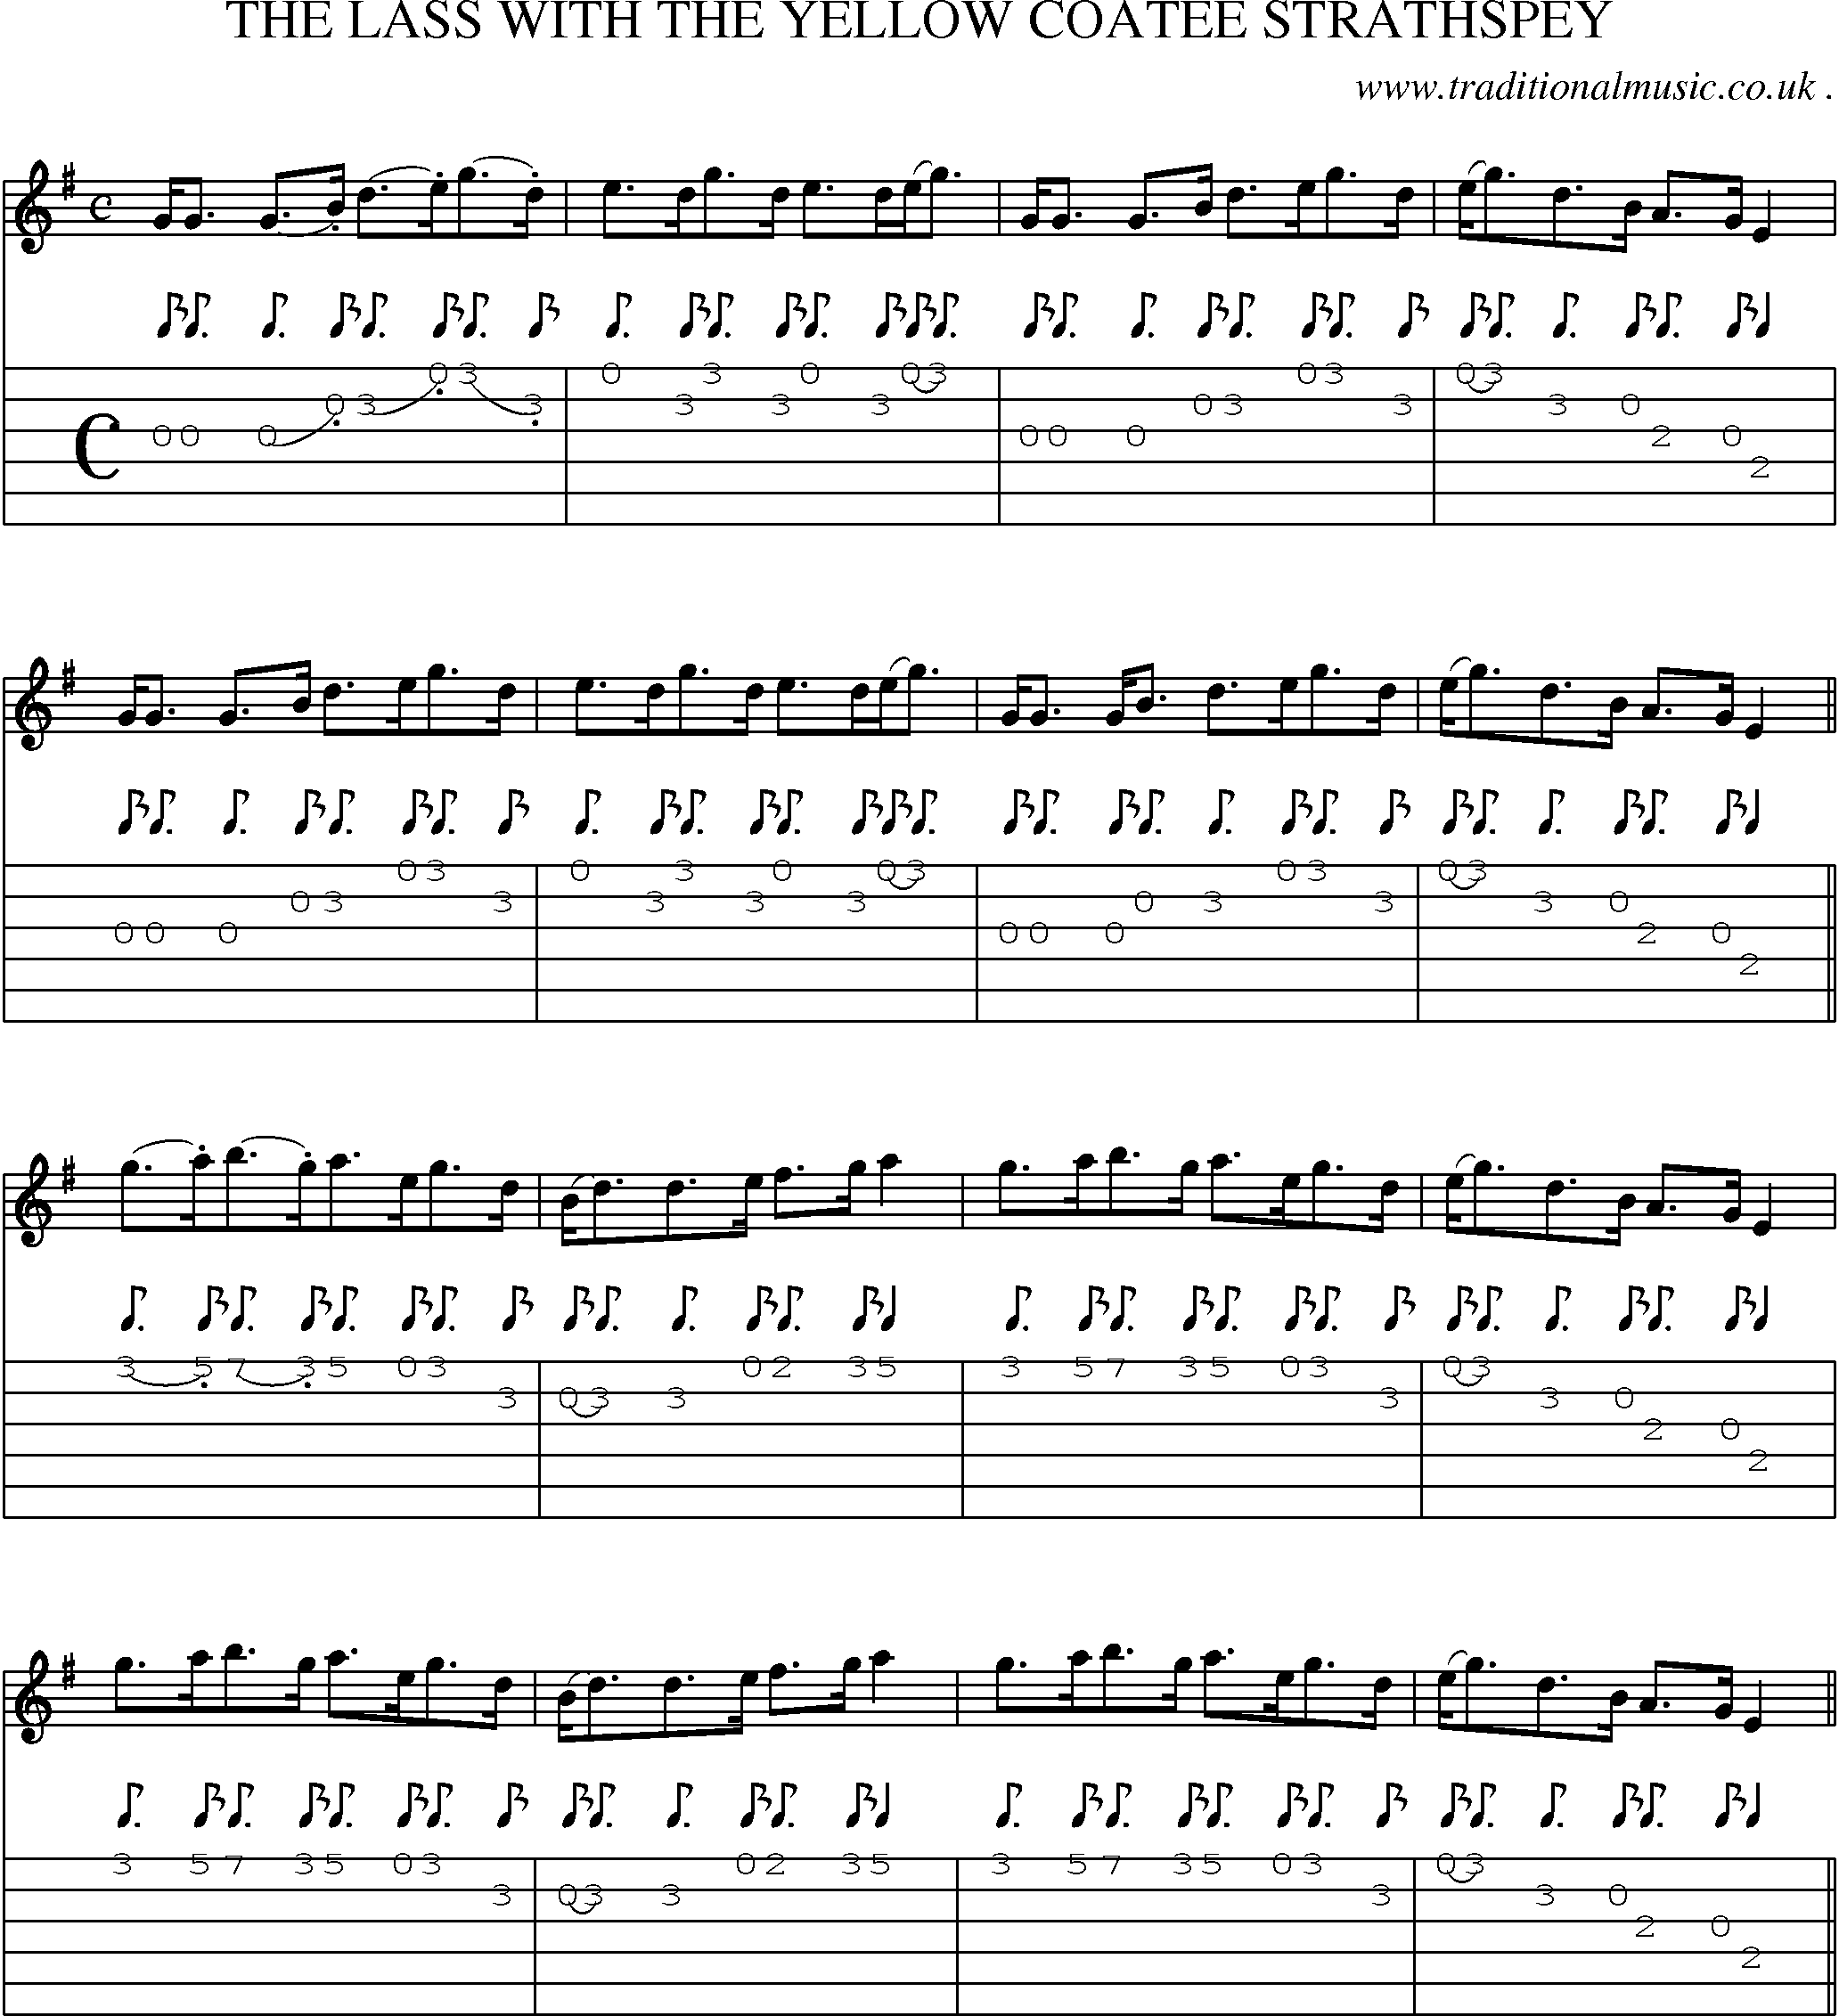 Sheet-Music and Guitar Tabs for The Lass With The Yellow Coatee Strathspey